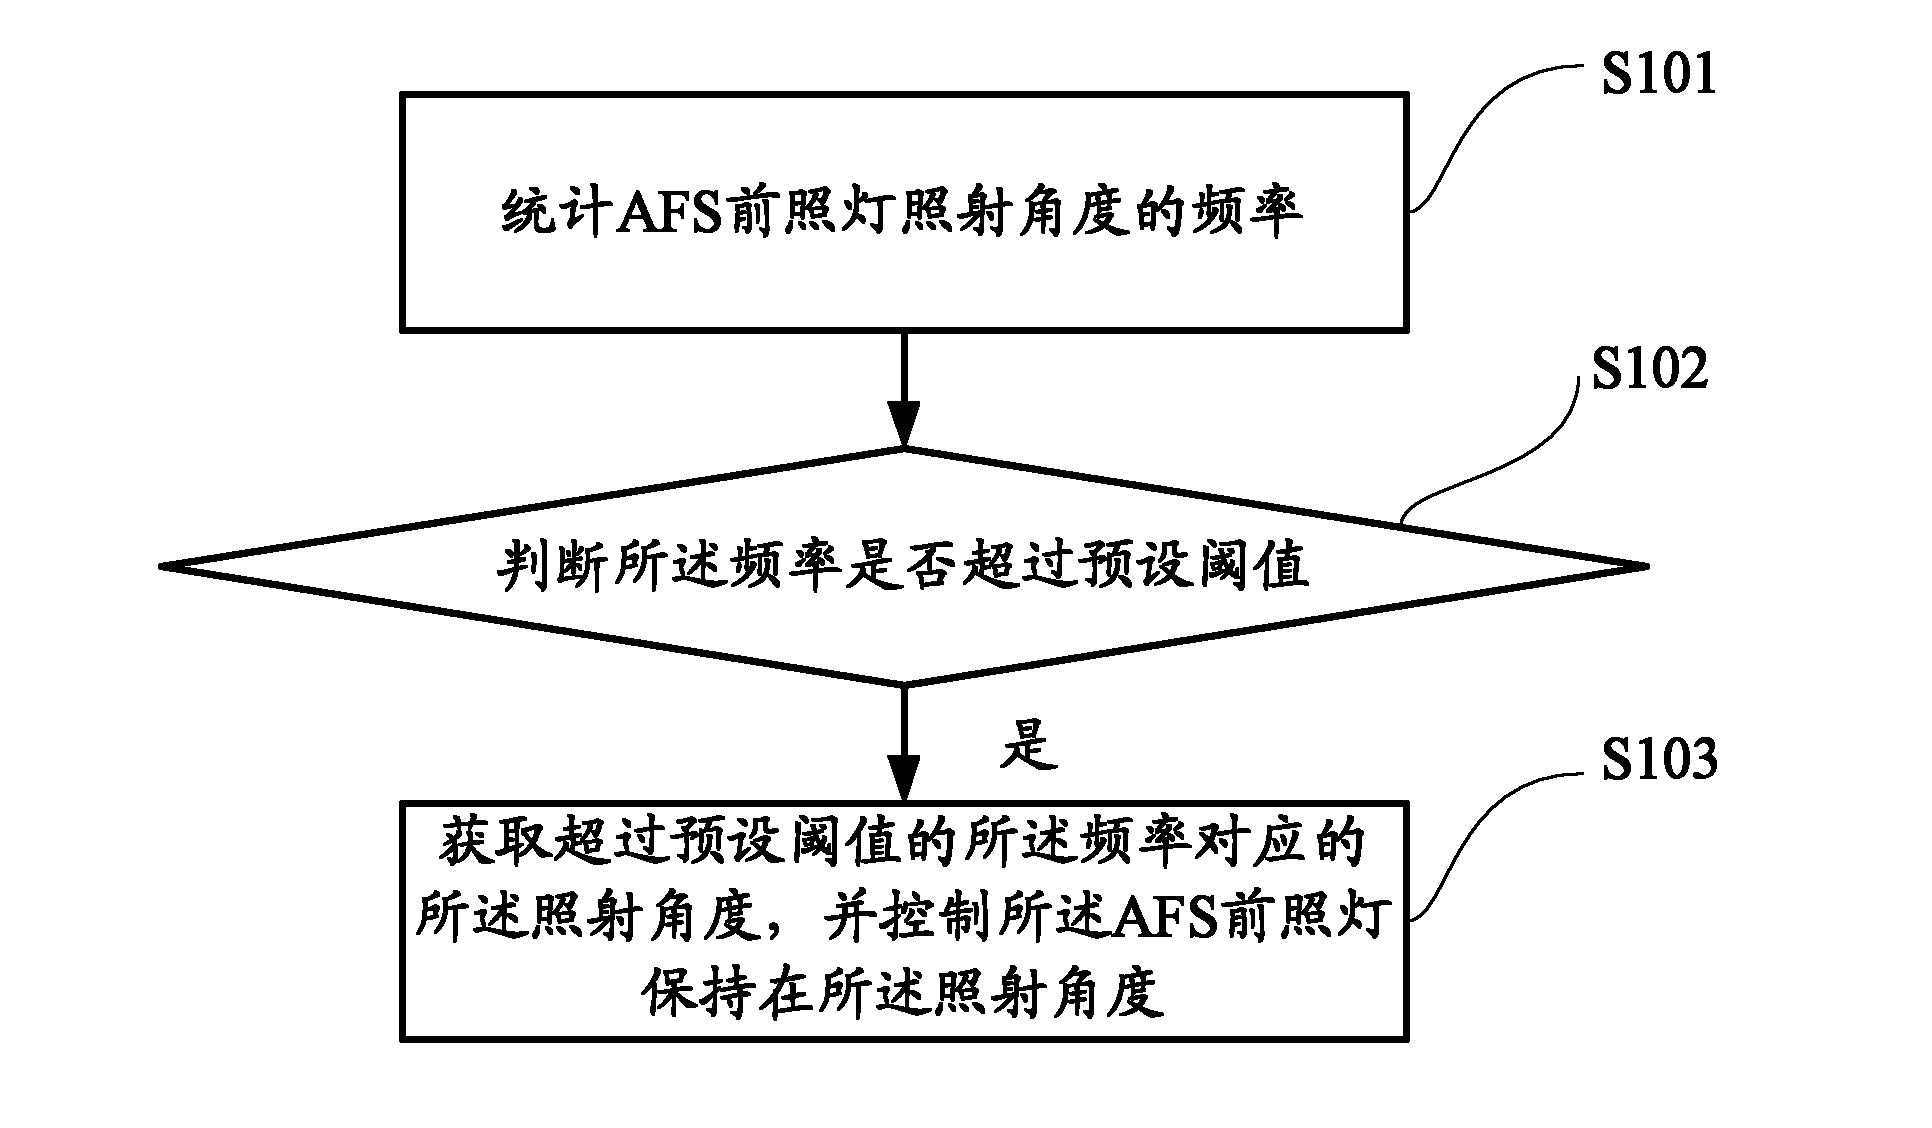 Adaptive front lighting system (AFS) control method and device